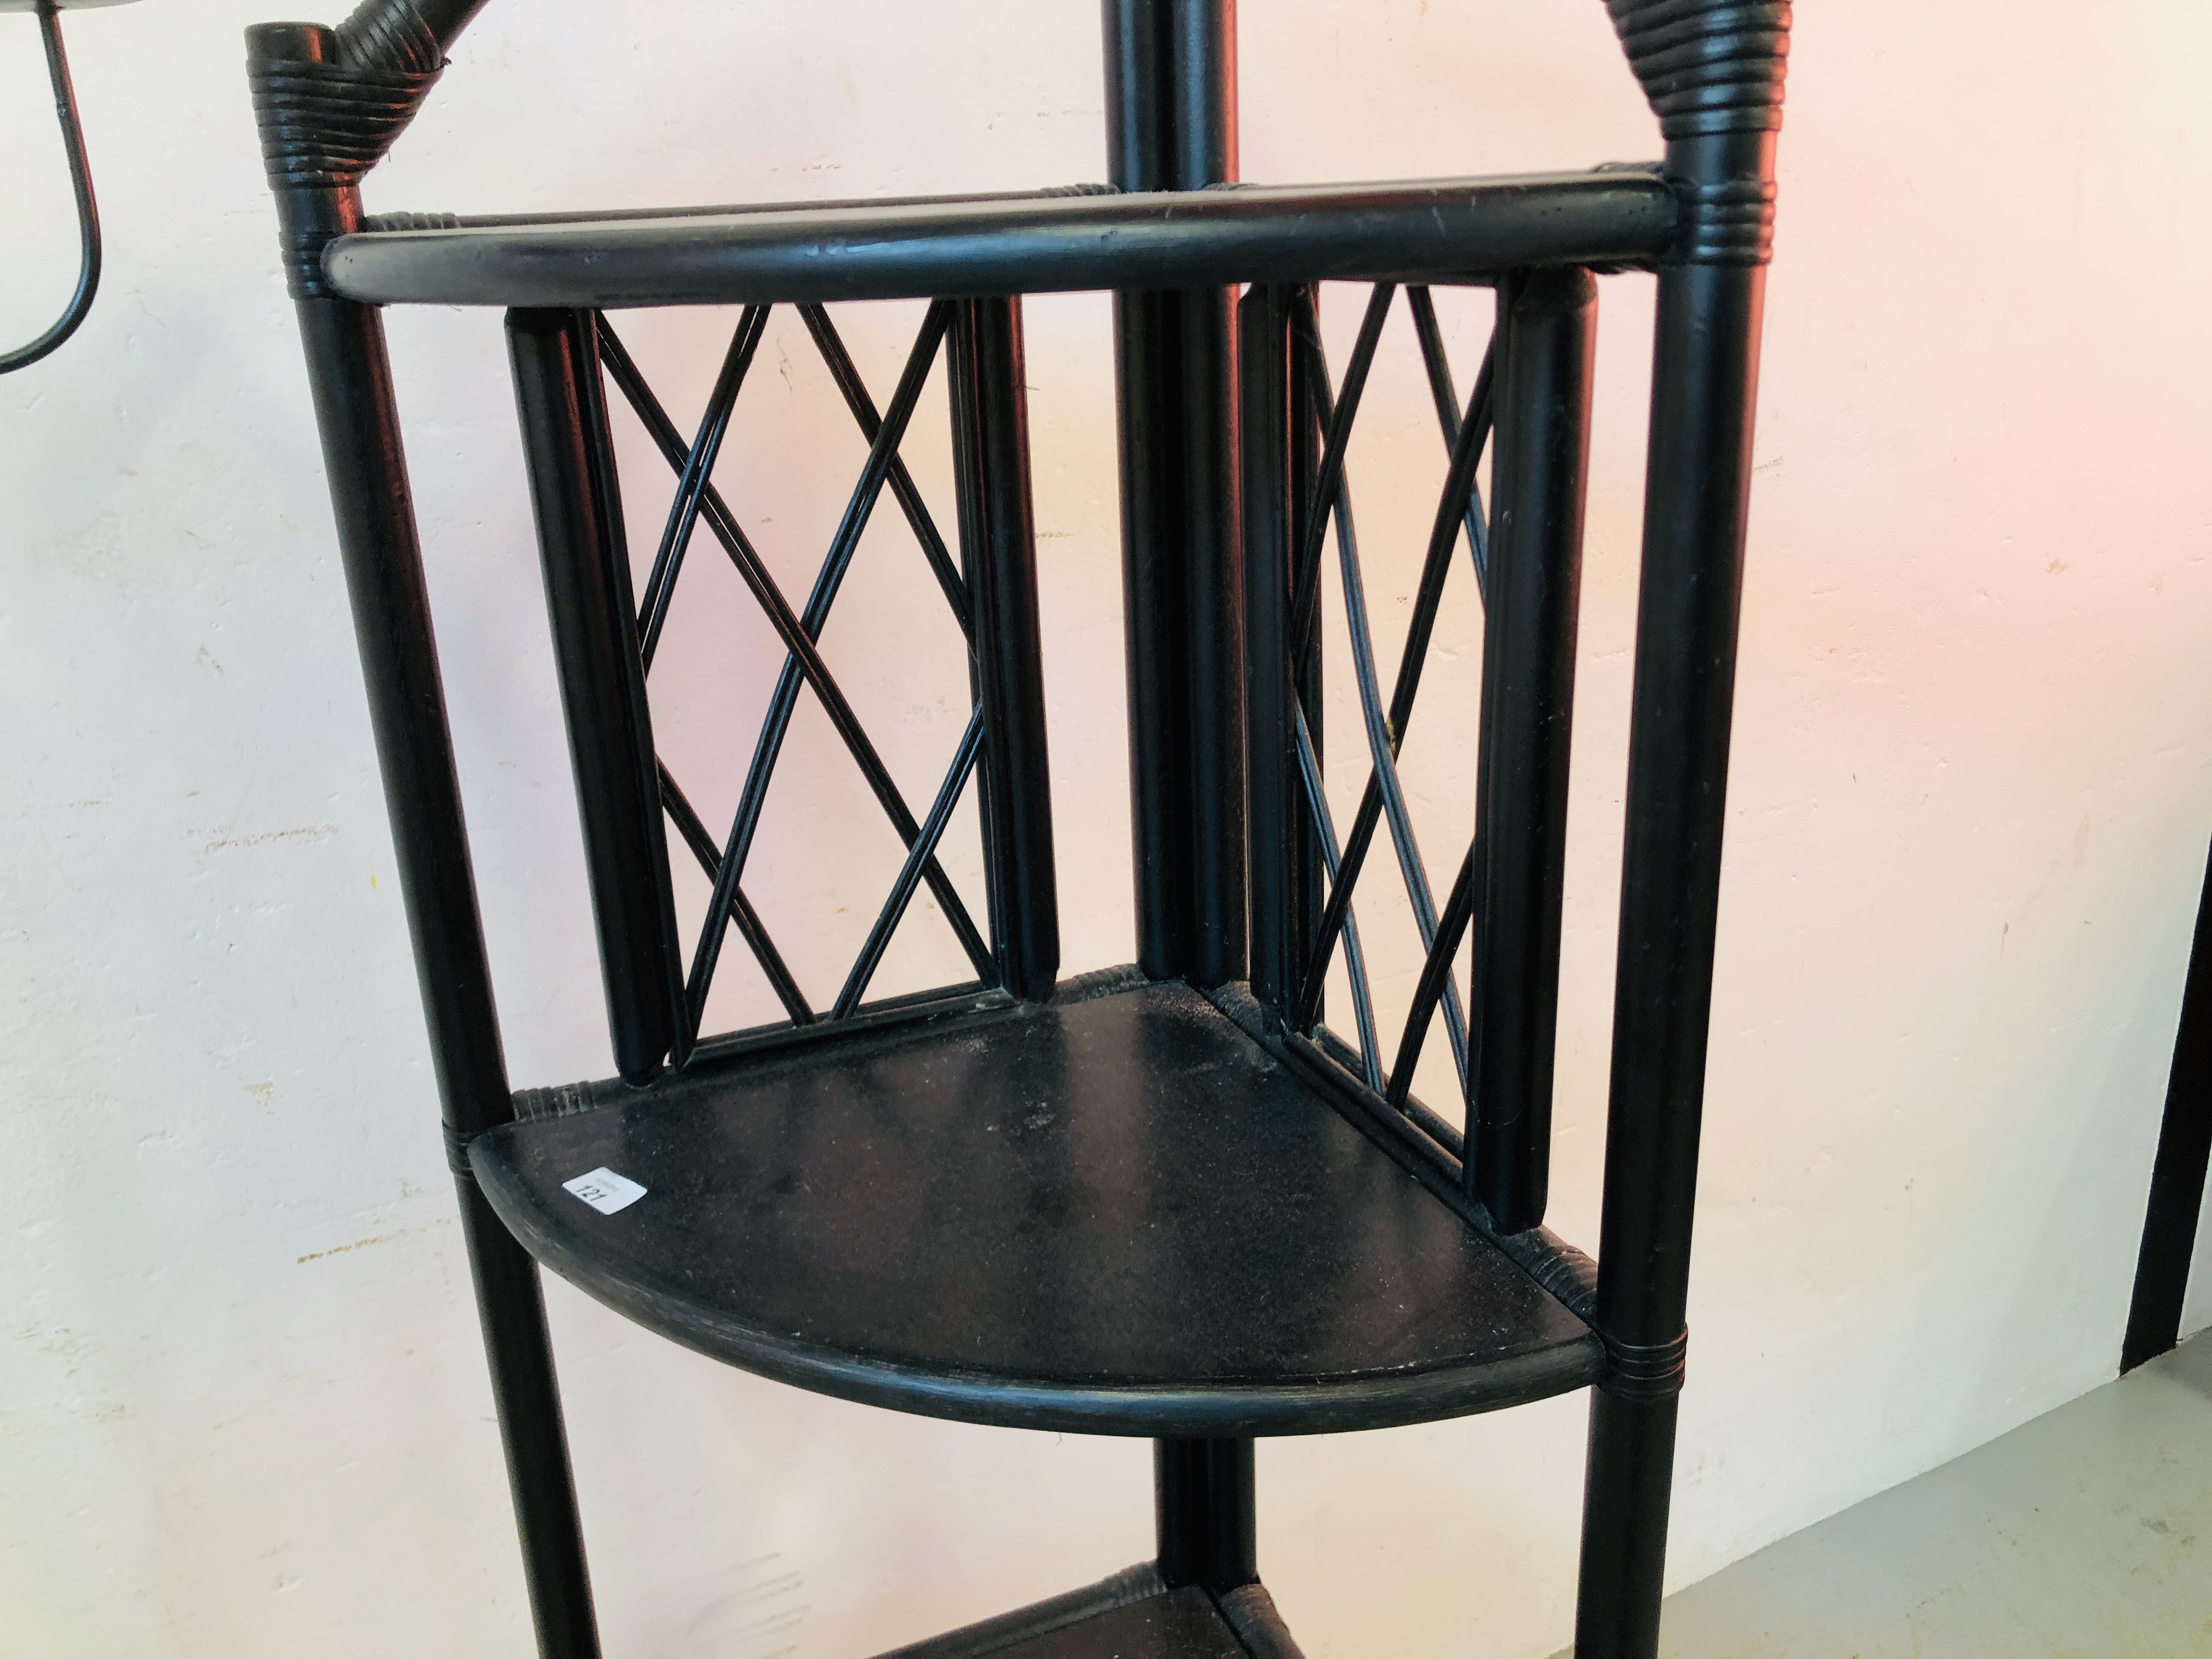 A CANE WORK FOUR TIER CORNER STAND AND A METAL CRAFT FLOOR STANDING CANDELABRA - Image 4 of 5